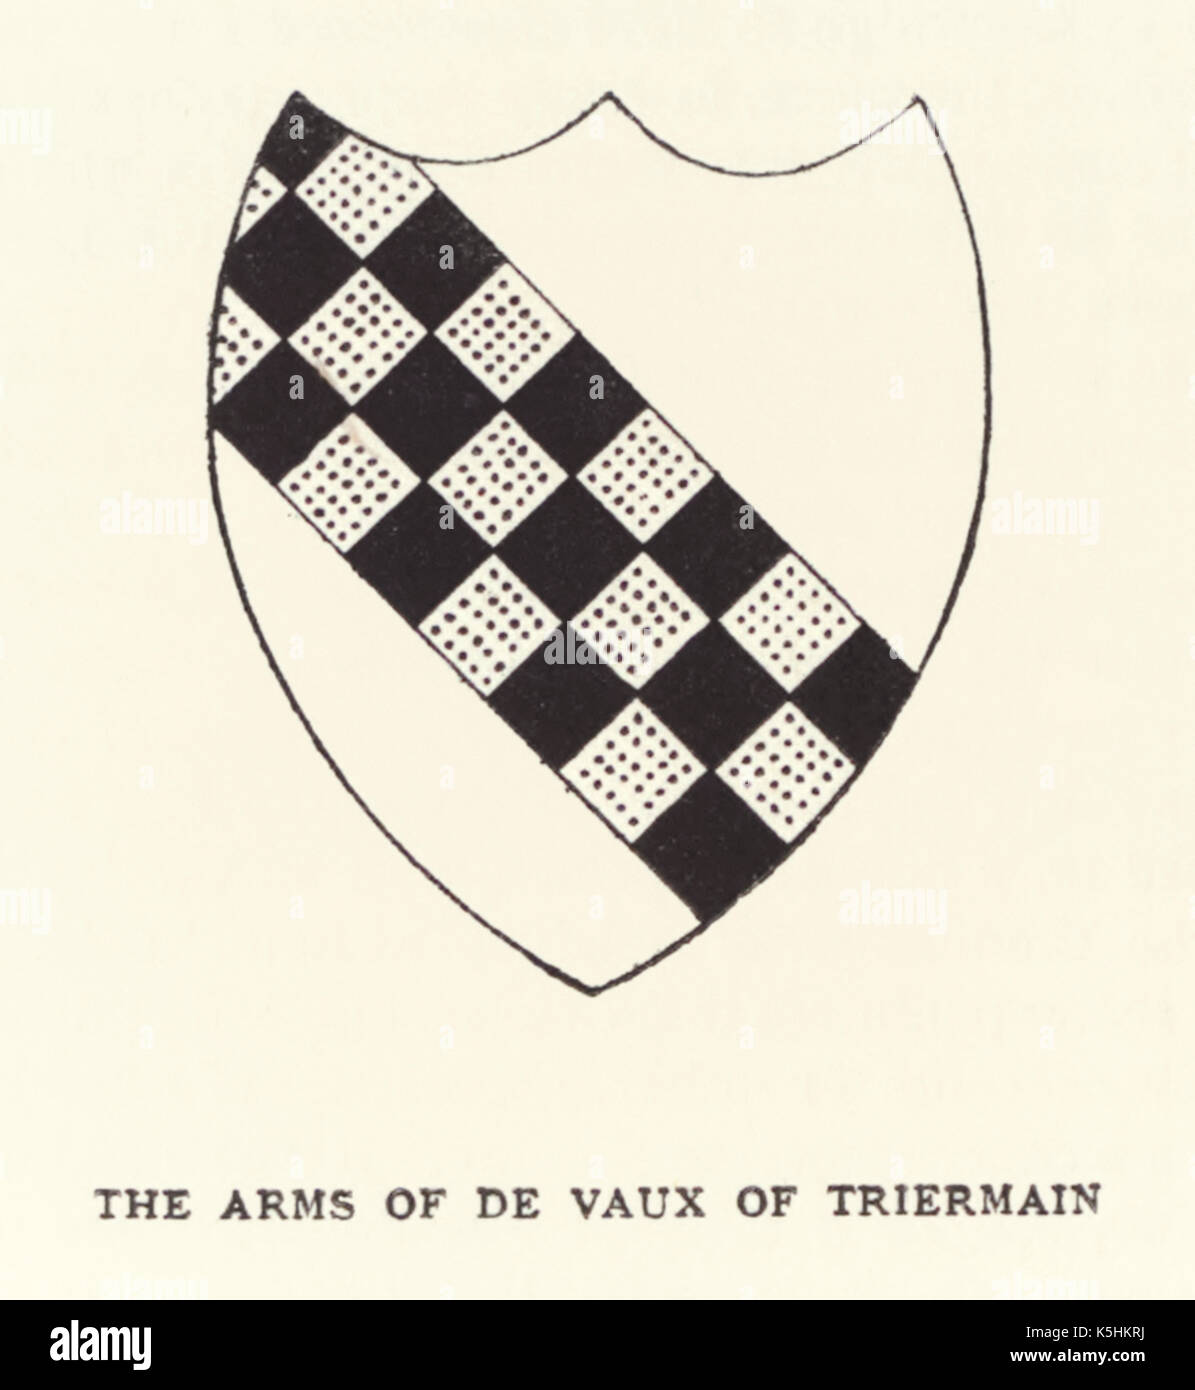 ‘The Arms of de Vaux of Triermain;’ the arms of the 12th century knight Sir Roland de Vaux who’s exploits were celebrated in the poem, ‘The Bridal of Triermain’ written in 1813 by Sir Walter Scott (1771-1832). Stock Photo